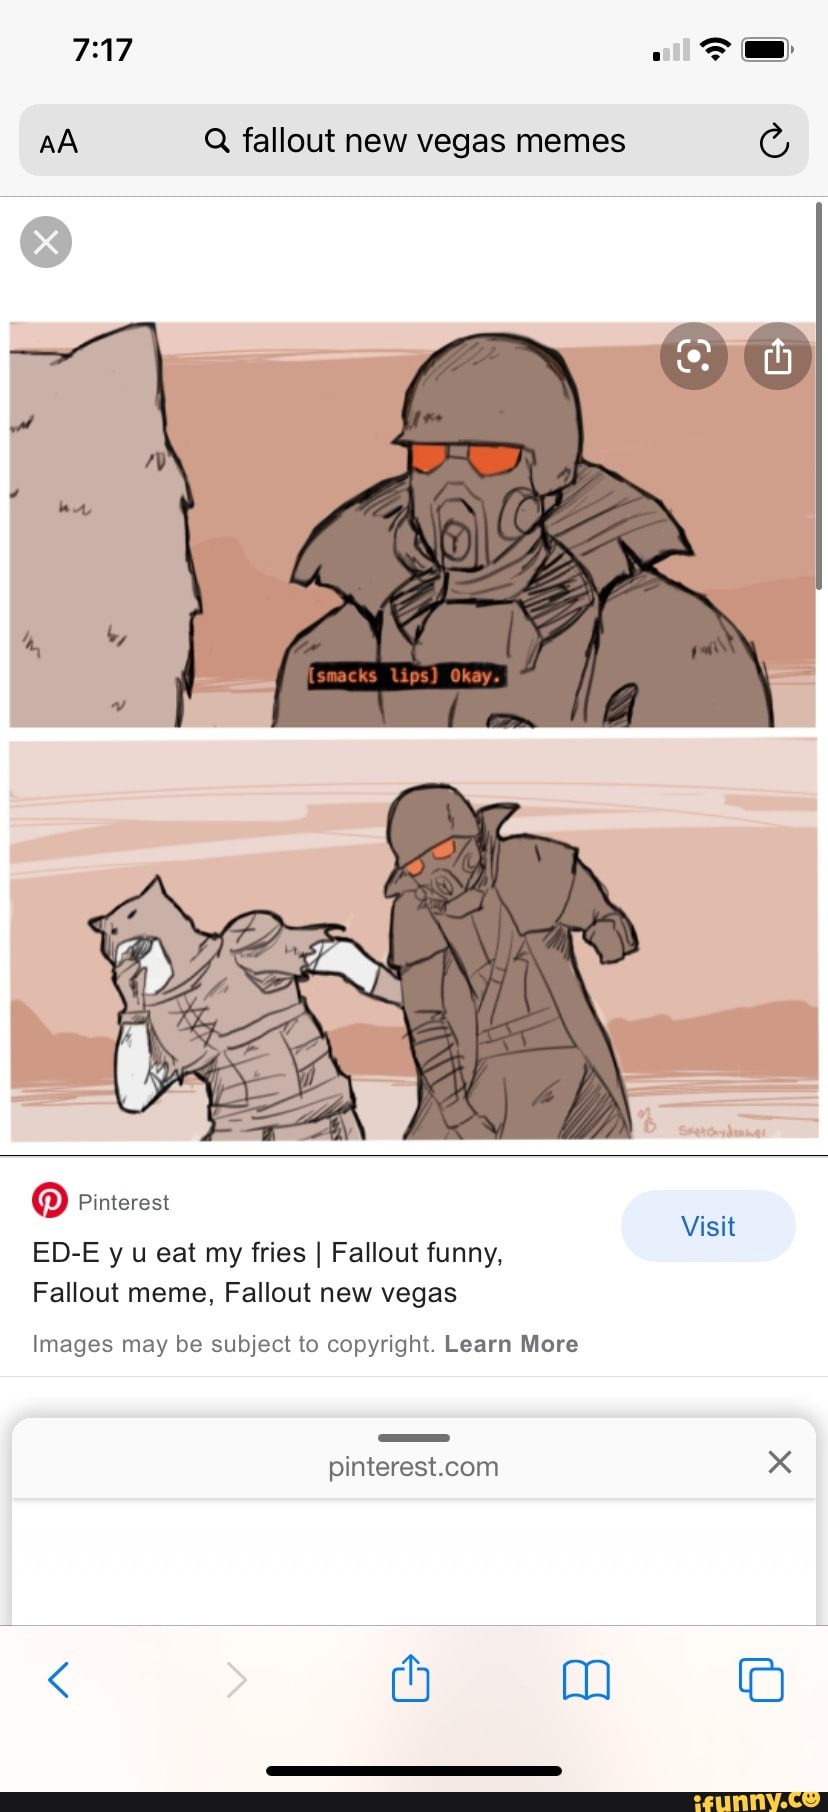 AA Q fallout new vegas memes Pinterest ED-E y u eat my fries I Fallout funny,  Fallout meme, Fallout new vegas Visit Images may be subject to copyright.  Learn More 